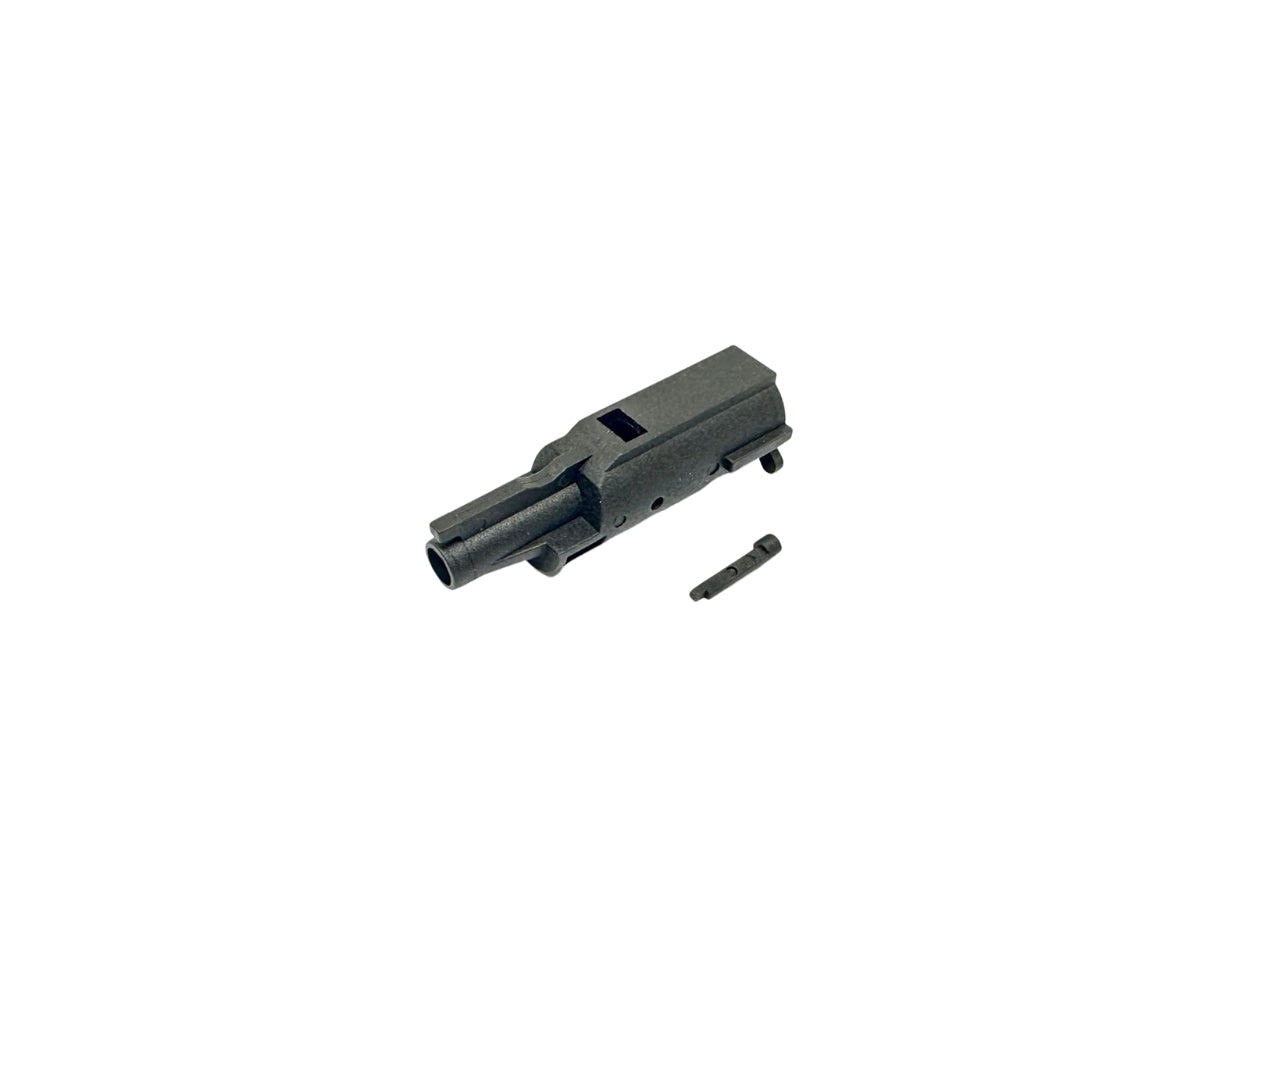 Ready Fighter Reinforced Nozzle for KSC Glock series with Parts No. 258